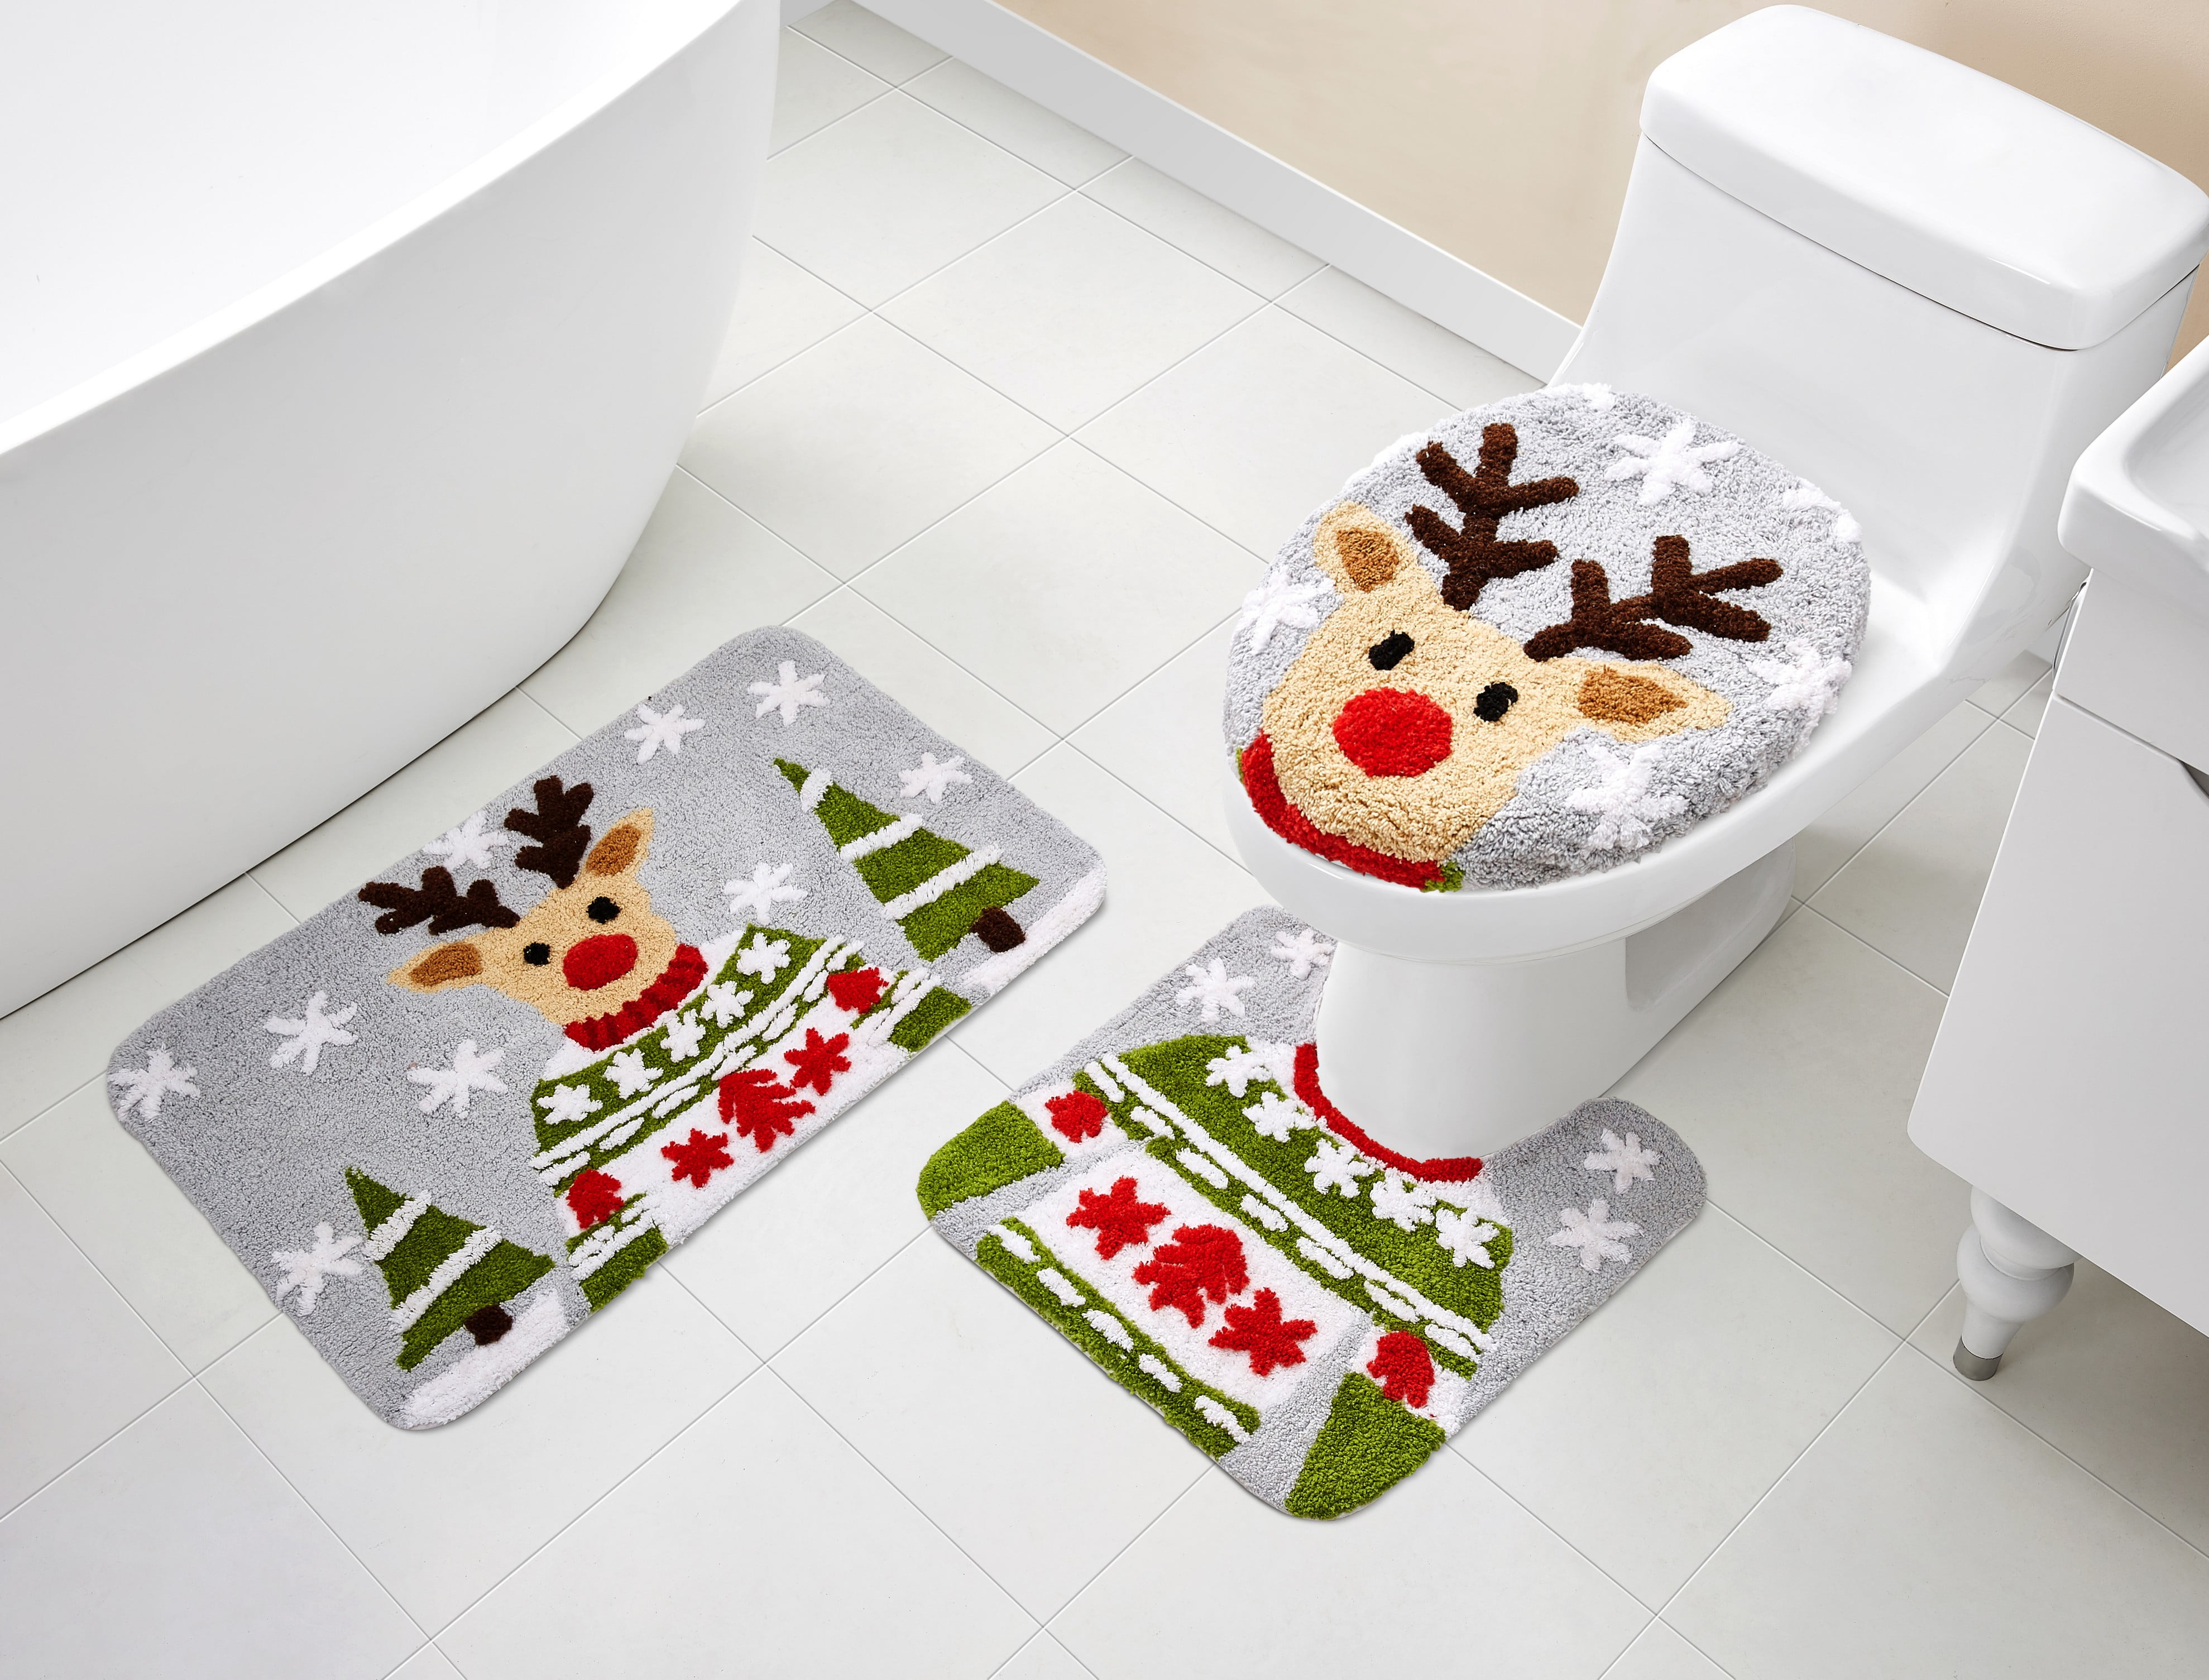 Xuanmuque Christmas Snowman Toilet Seat Cover and Rug 2 Pack Set Christmas Bathroom Decorations